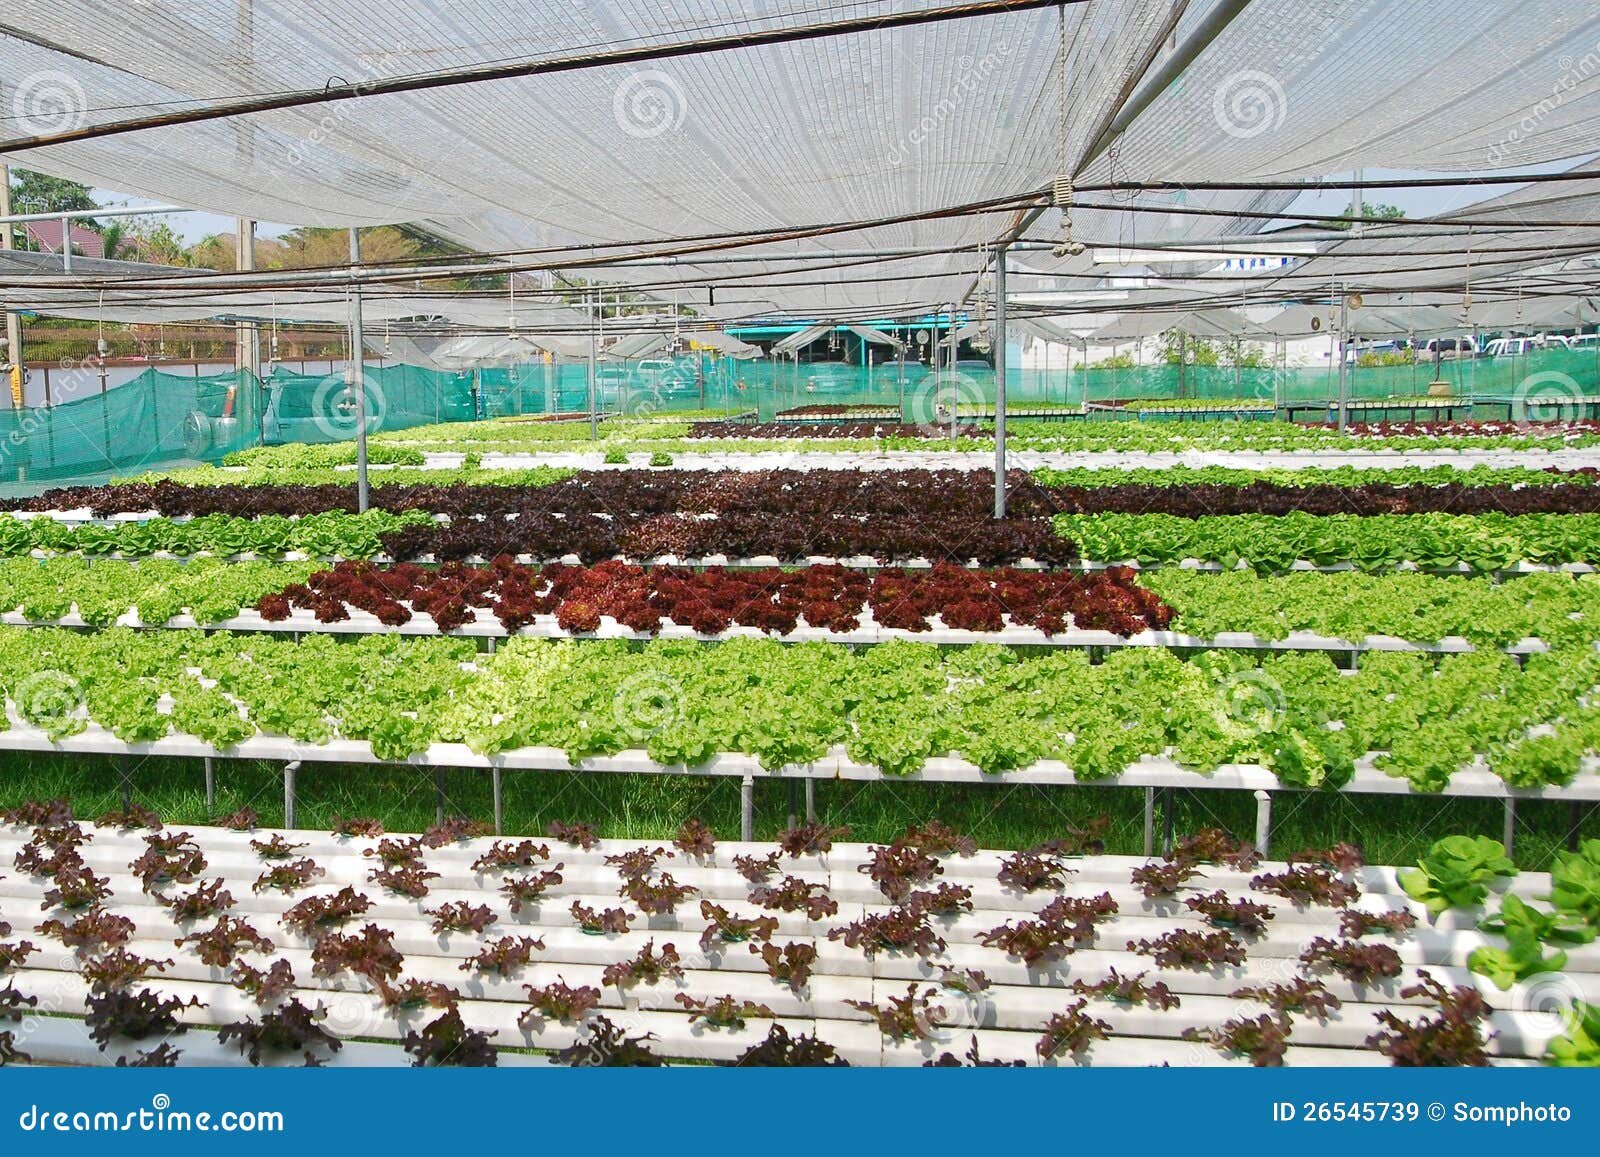 Hydroponic Vegetables Royalty Free Stock Images - Image: 26545739